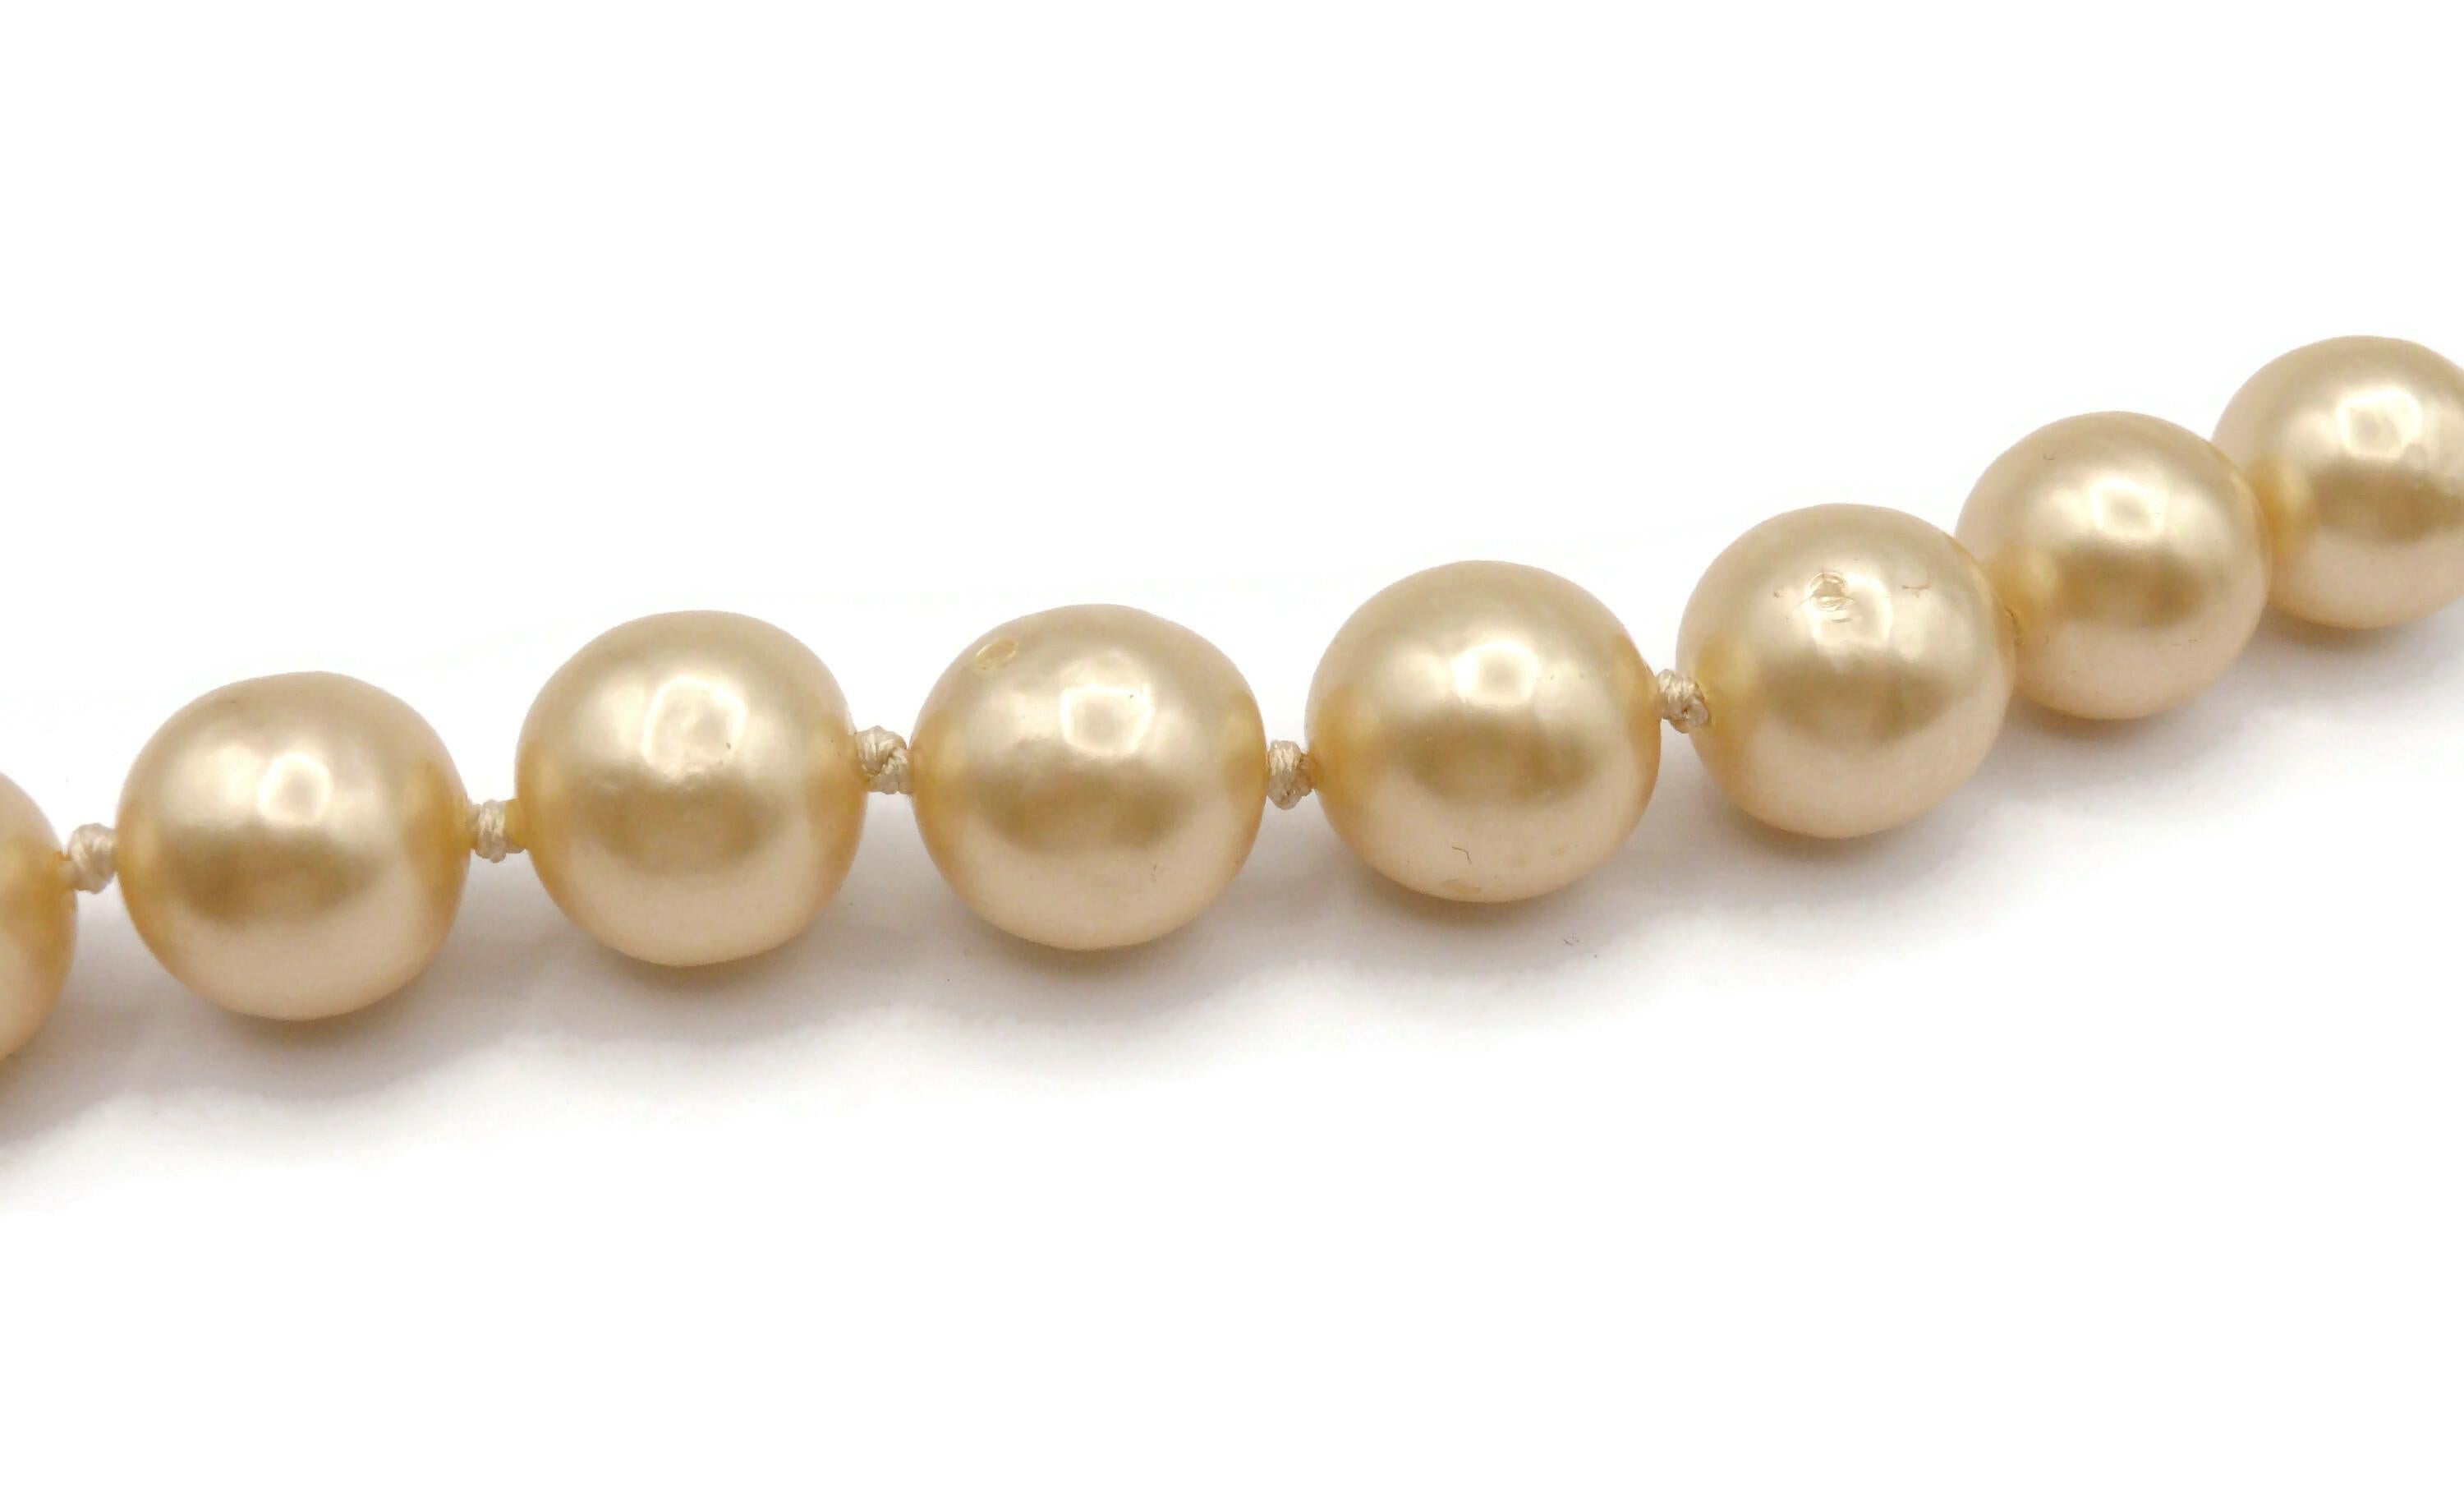 CHANEL by KARL LAGERFELD Vintage Large Faux Pearl Necklace, 1993 For Sale 3